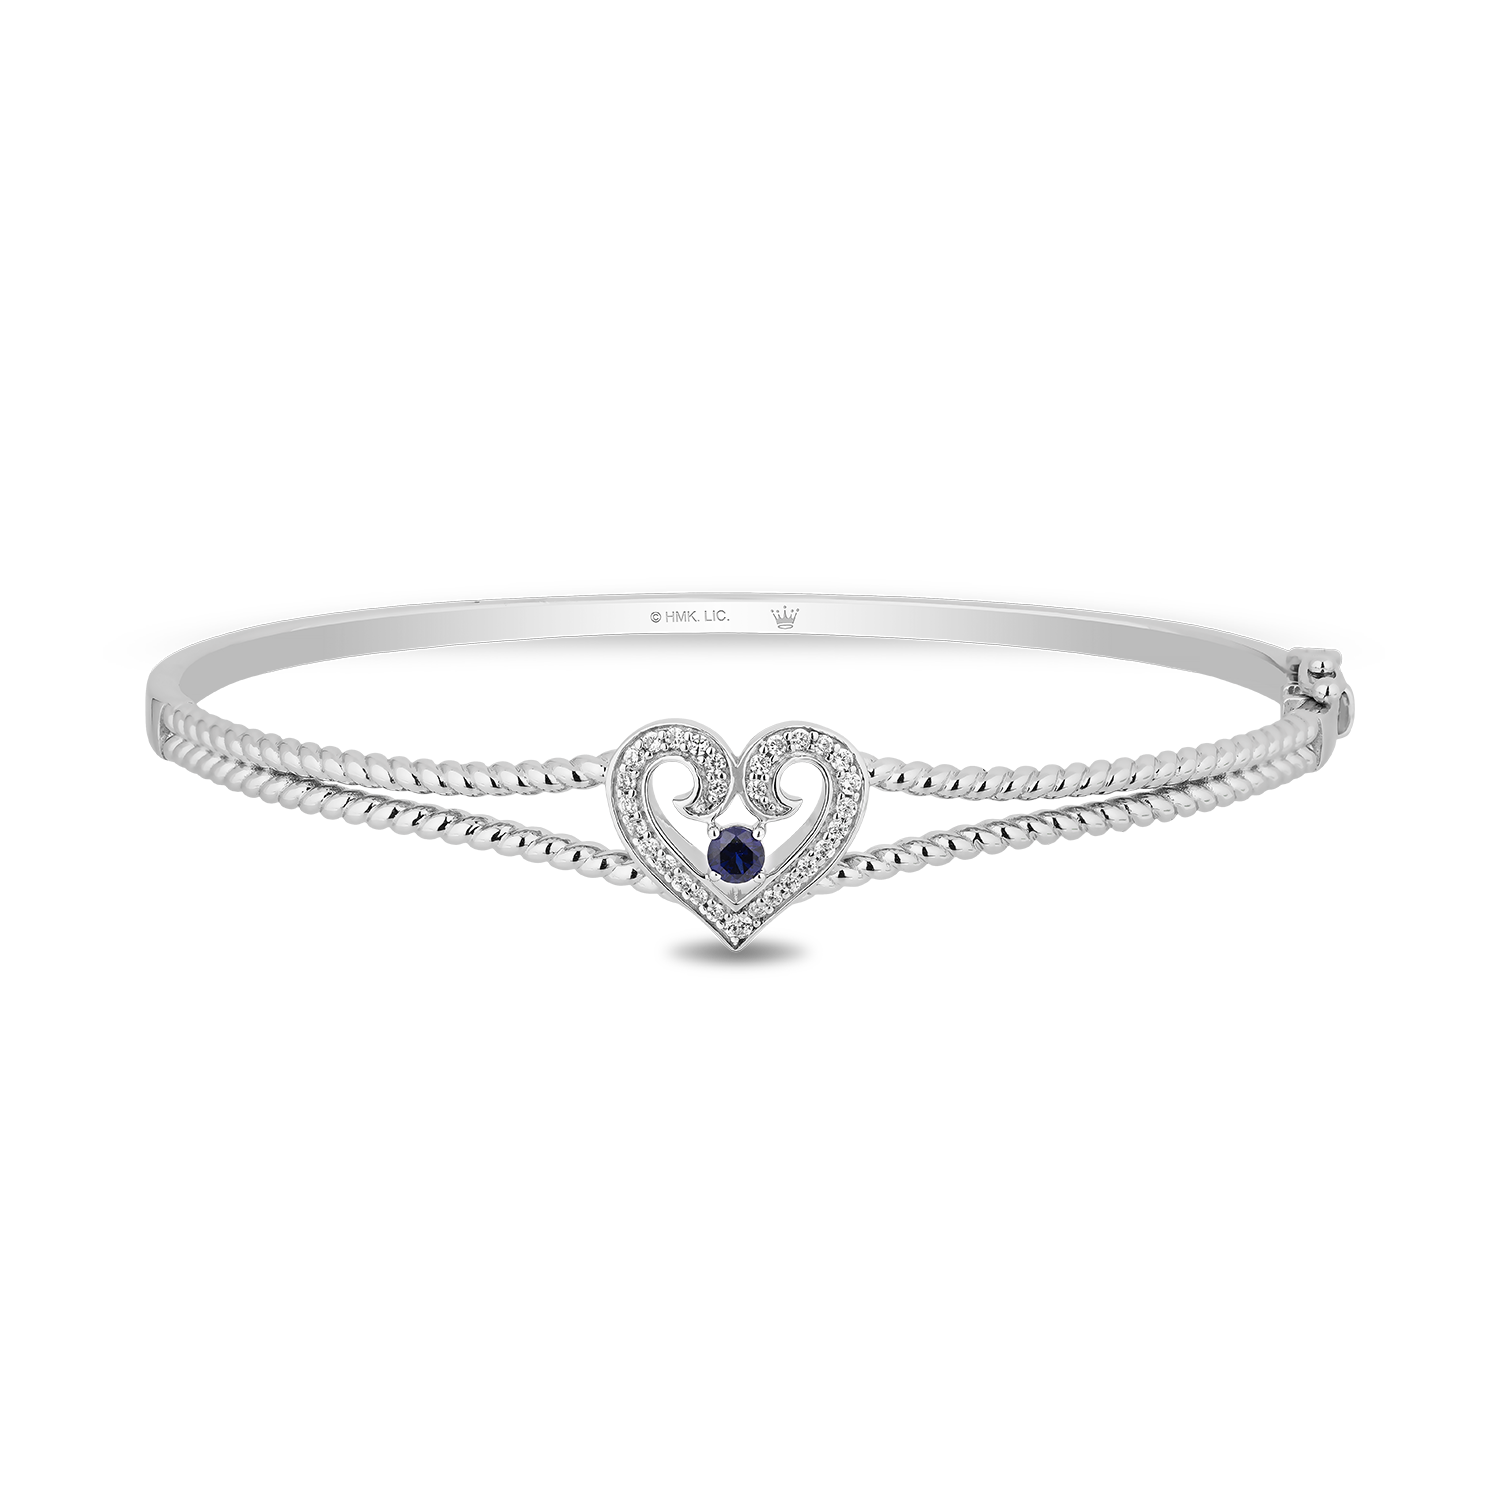 Hallmark Fine Jewelry Follow Your Heart Bangle in Sterling Silver with